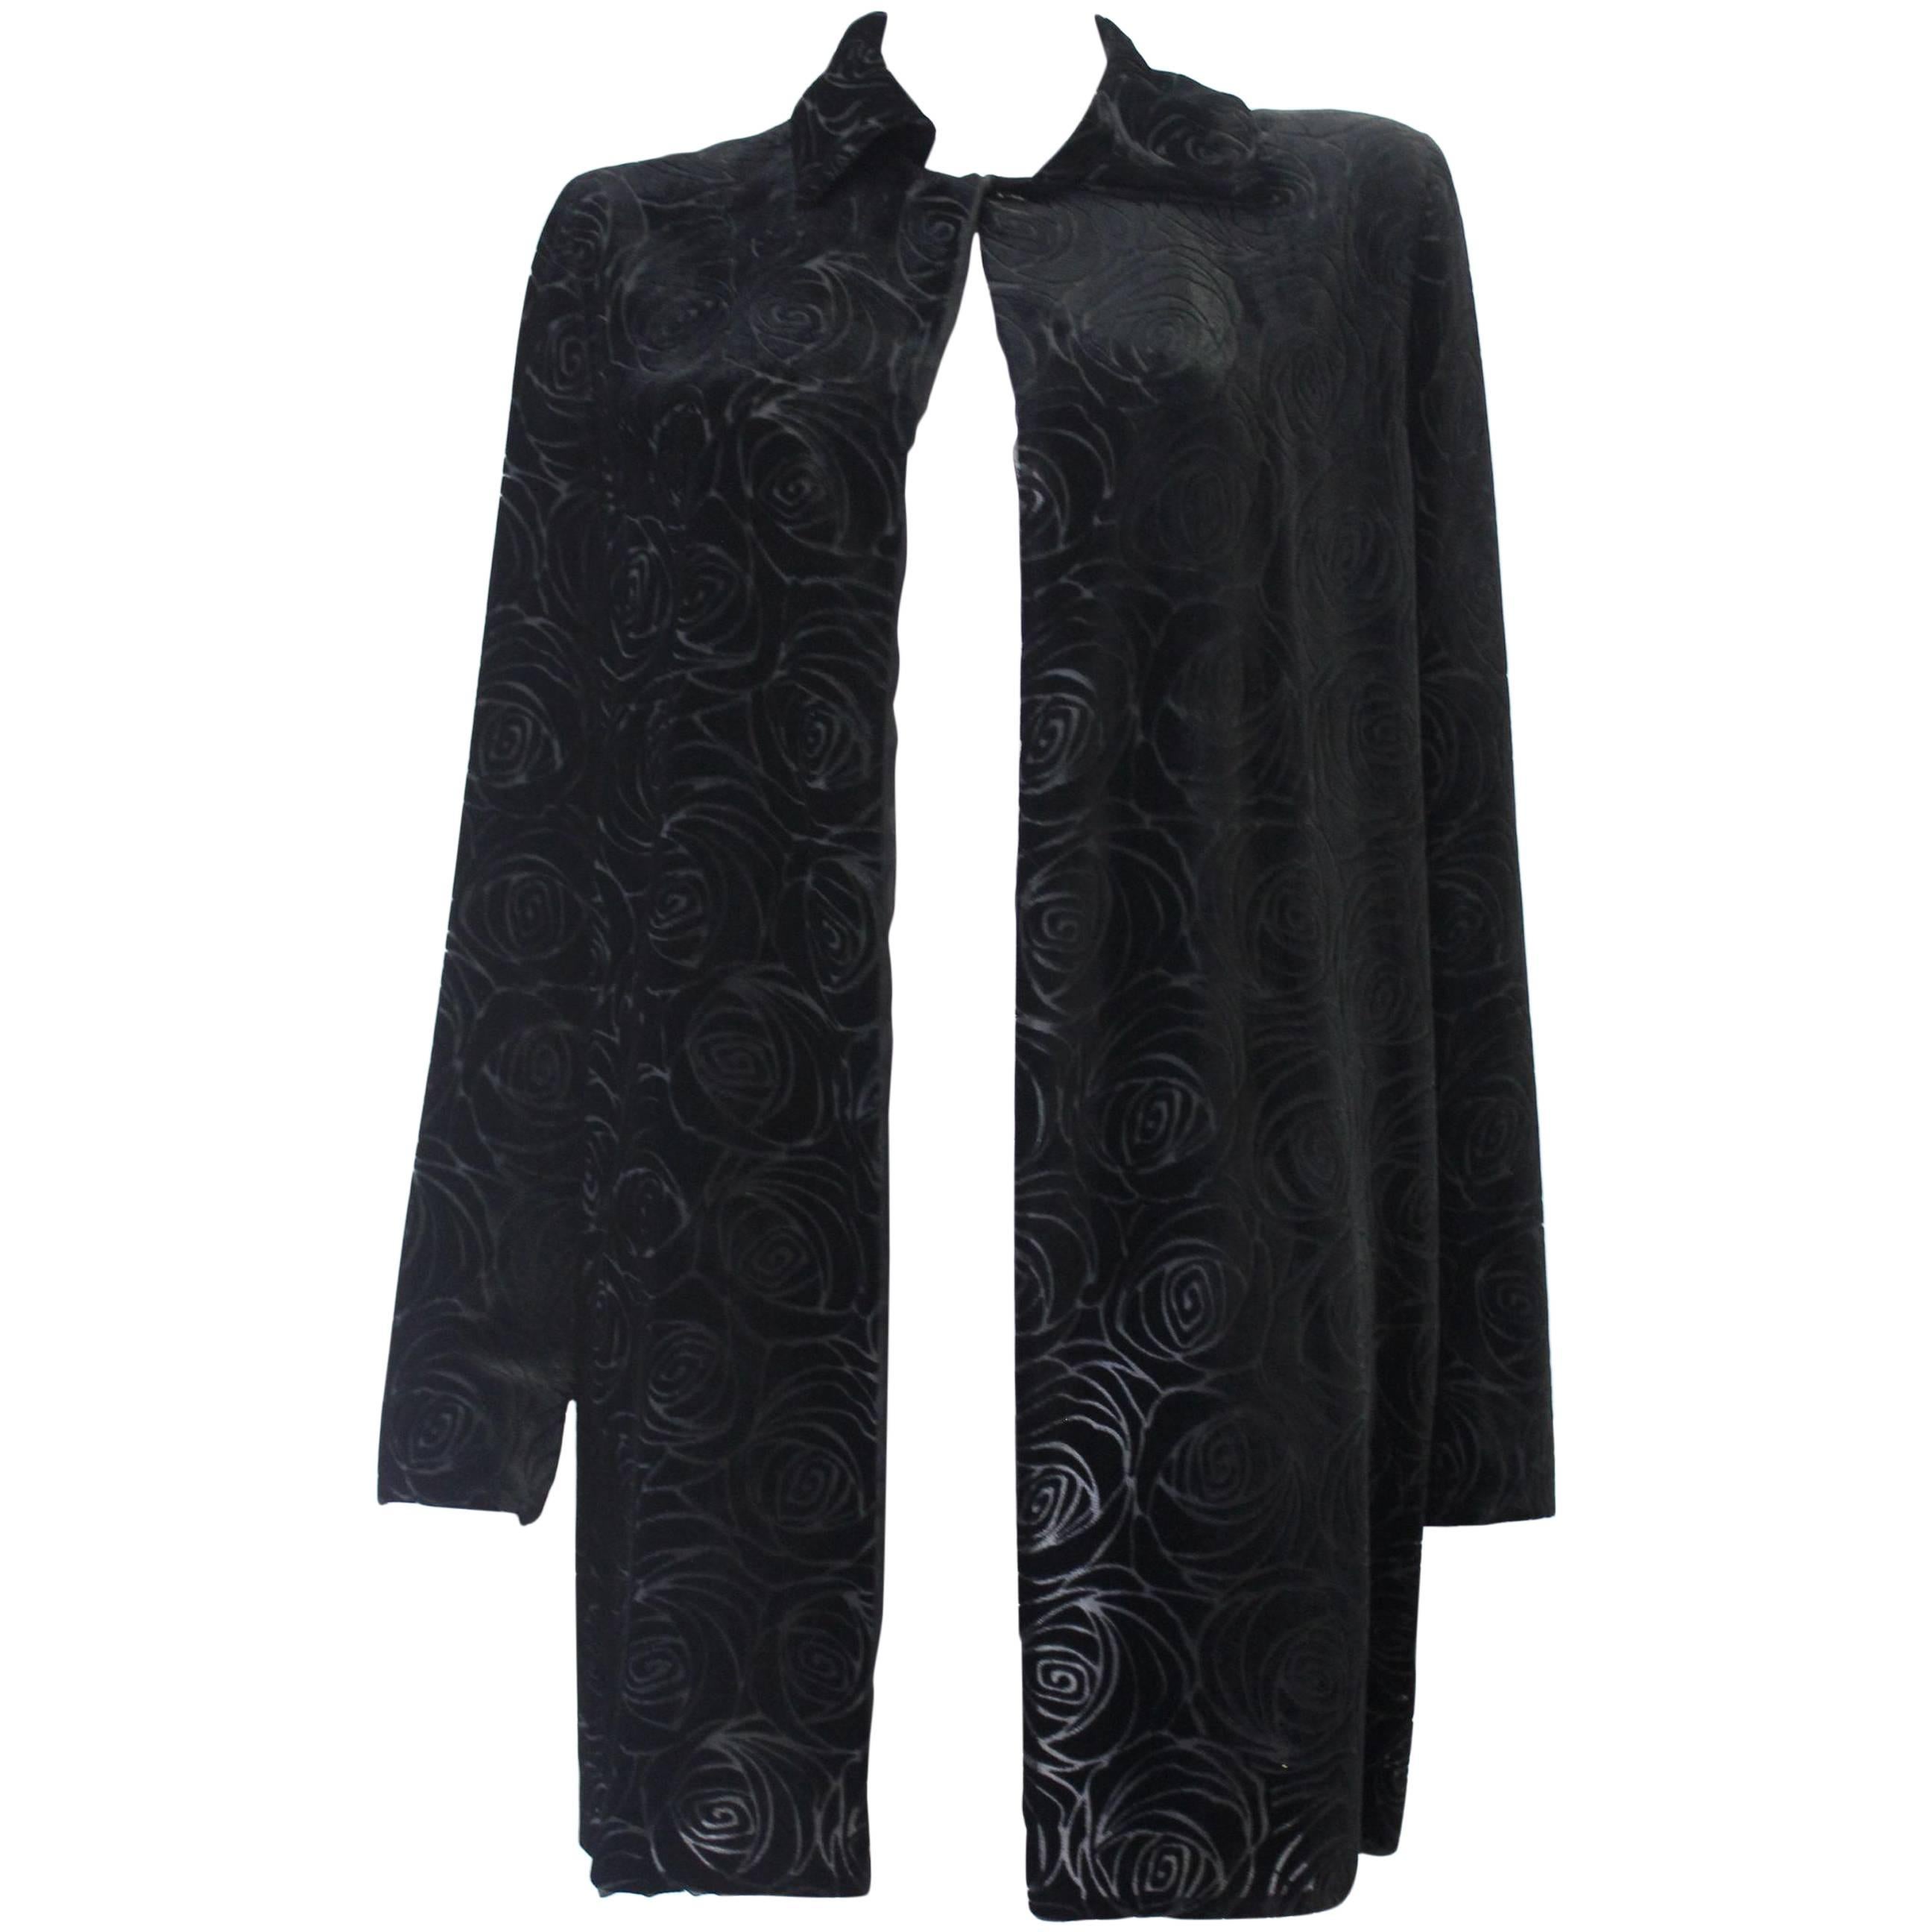 Gianni Versace Couture Laser Cut Silk Velvet Evening Jacket Fall 1997 For Sale